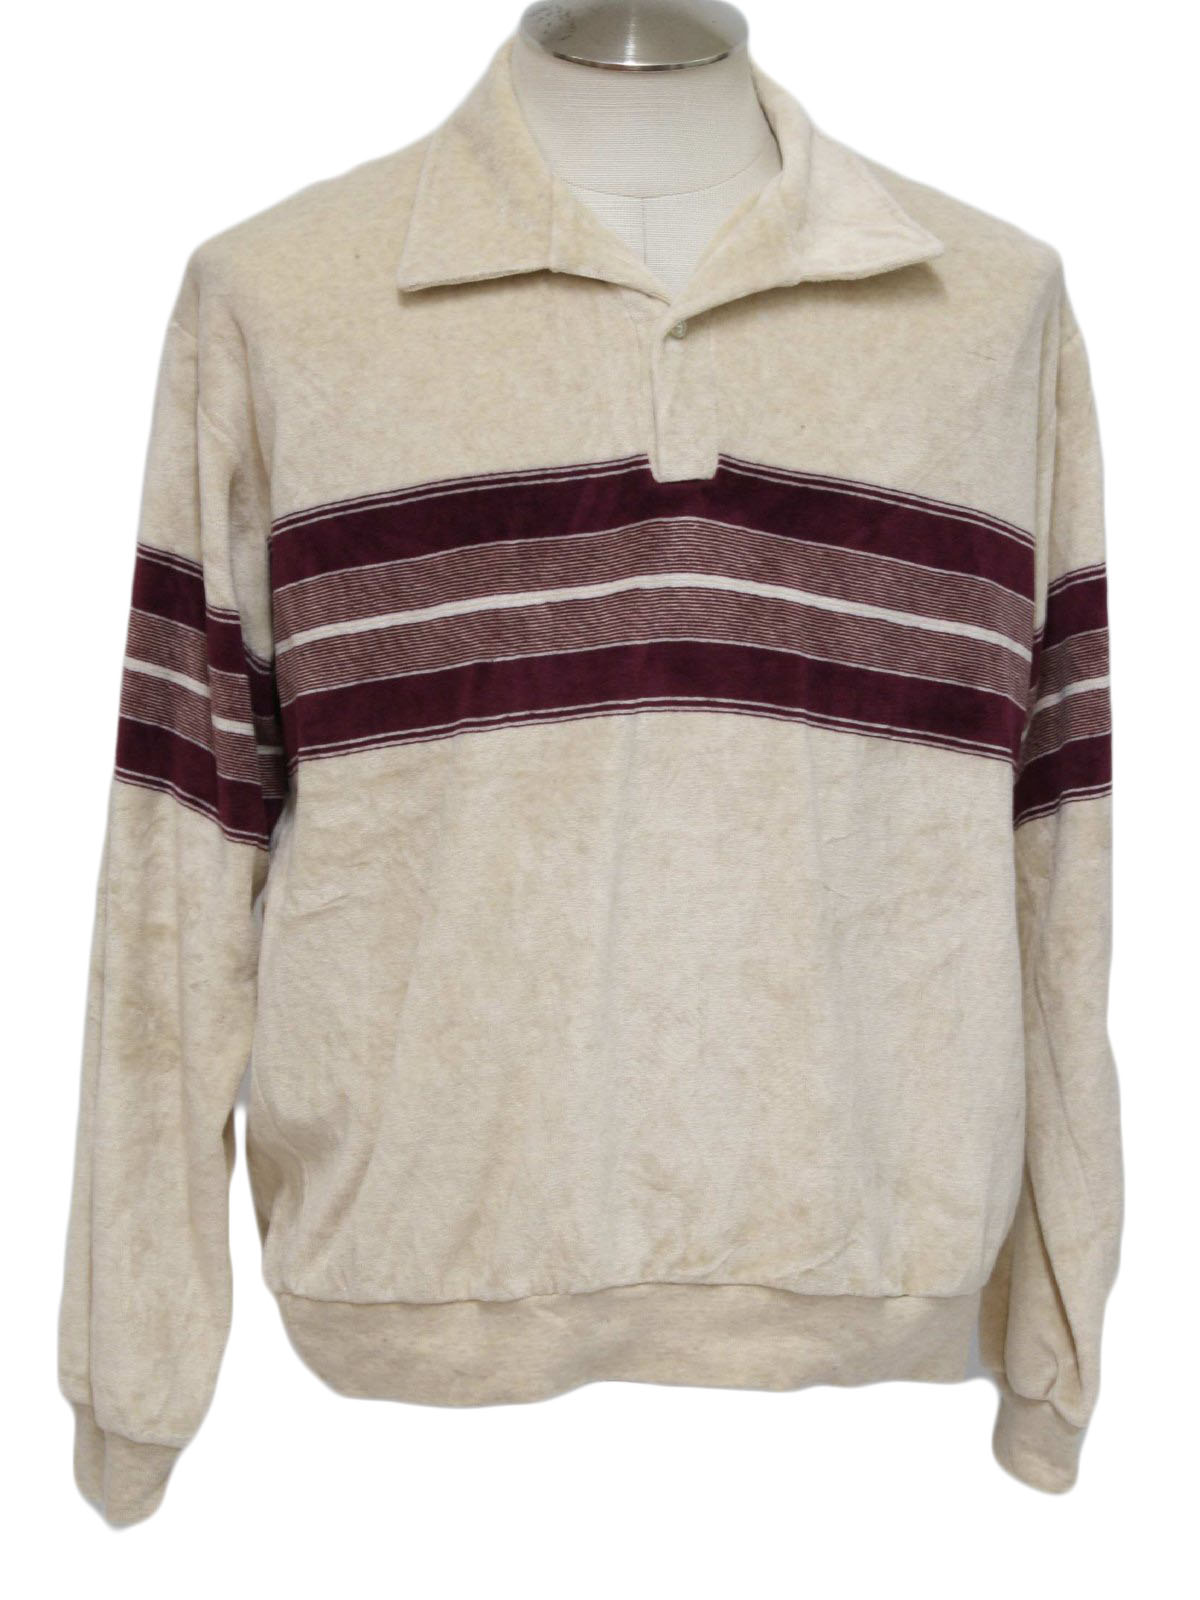 Vintage 70s Velour Shirt: 70s -no label- Mens wheat, white and maroon ...